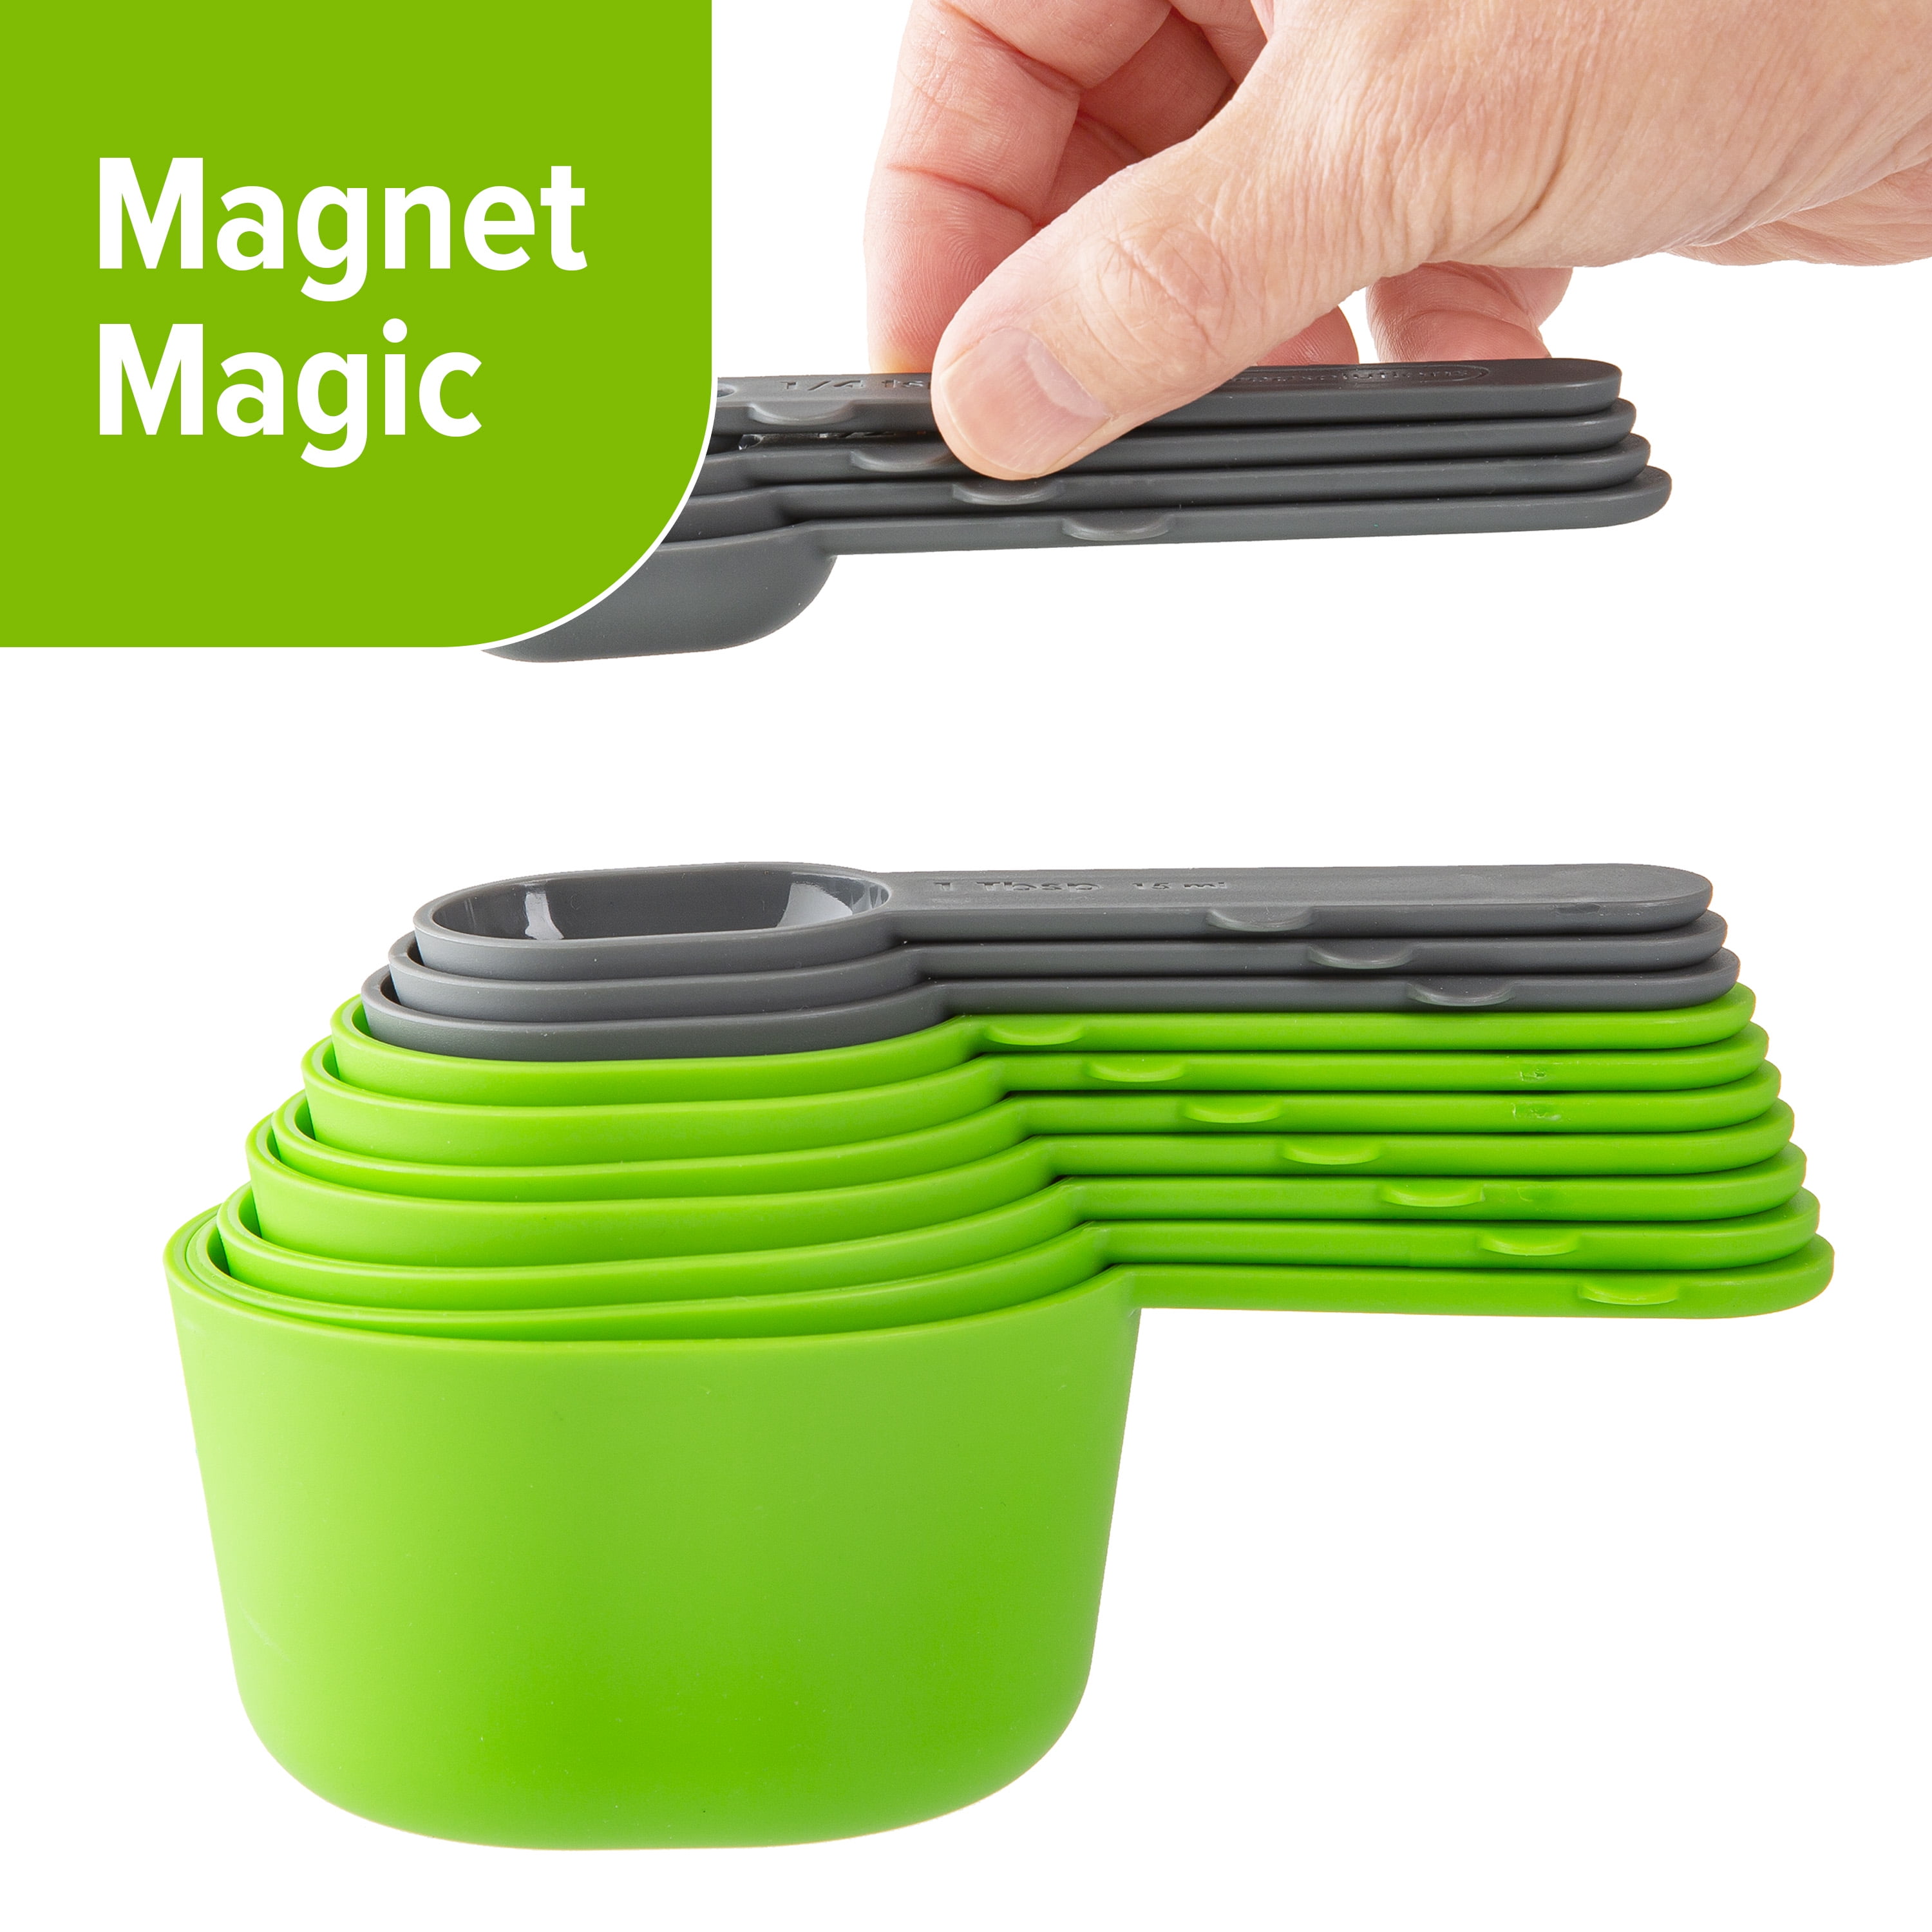 Magnetic Measuring Cups - The Peppermill